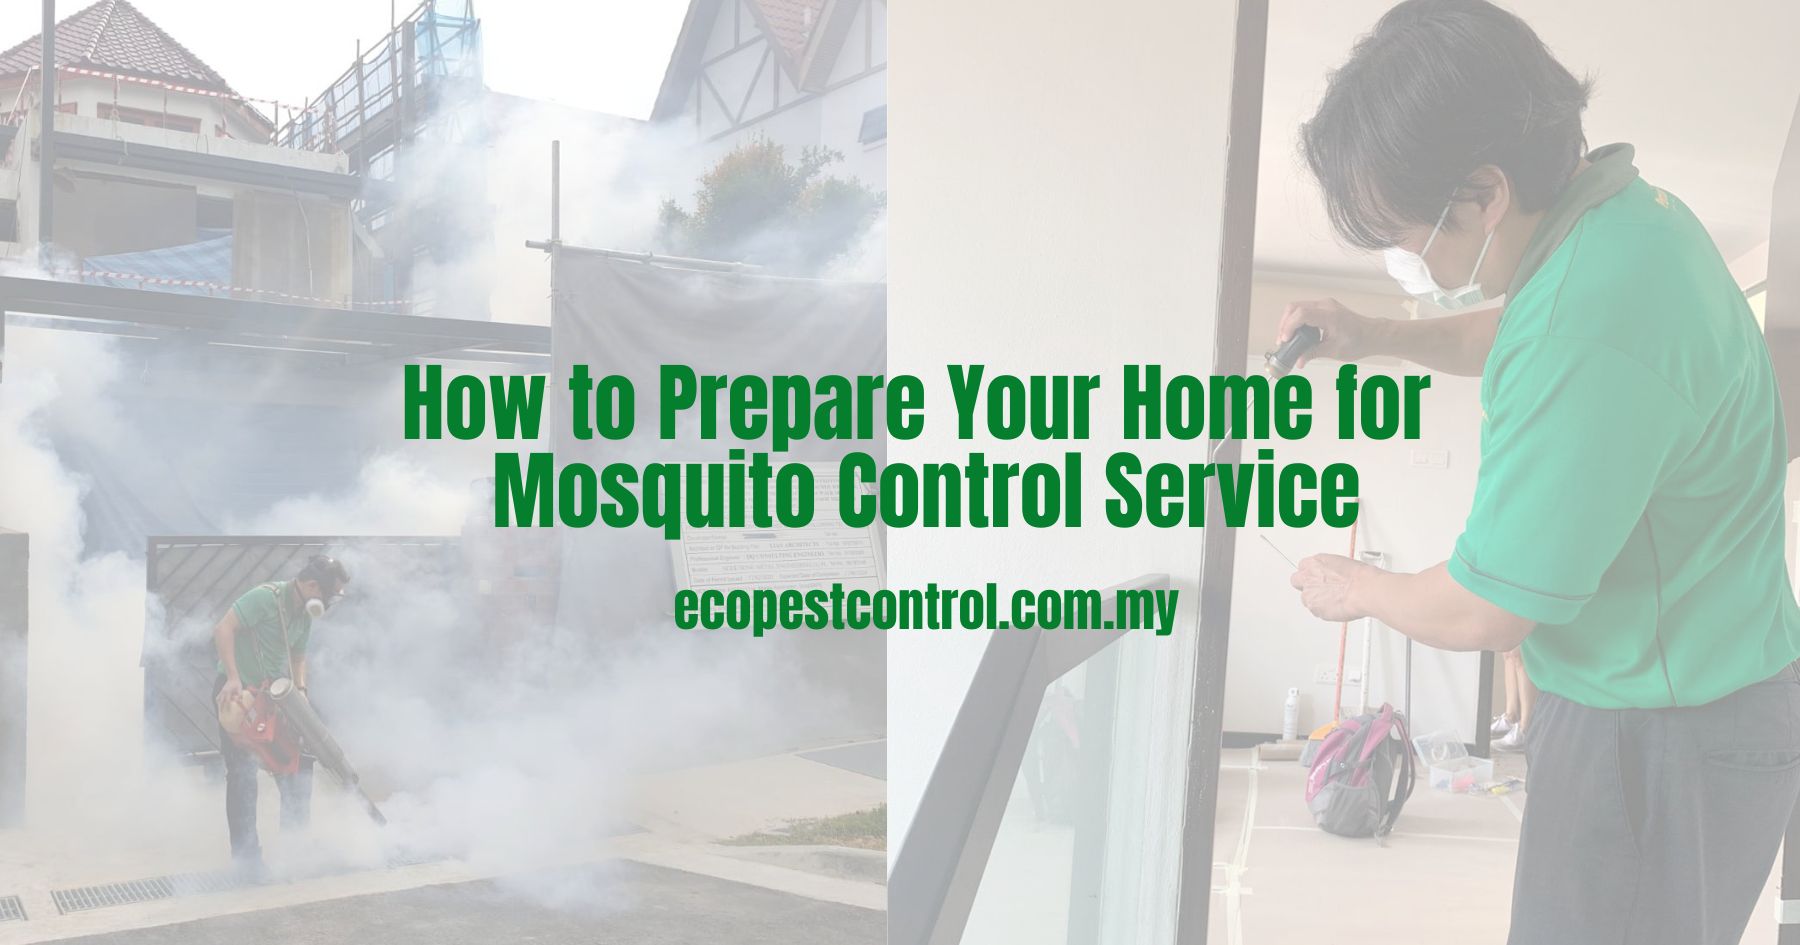 How to Prepare Your Home for Mosquito Control Service